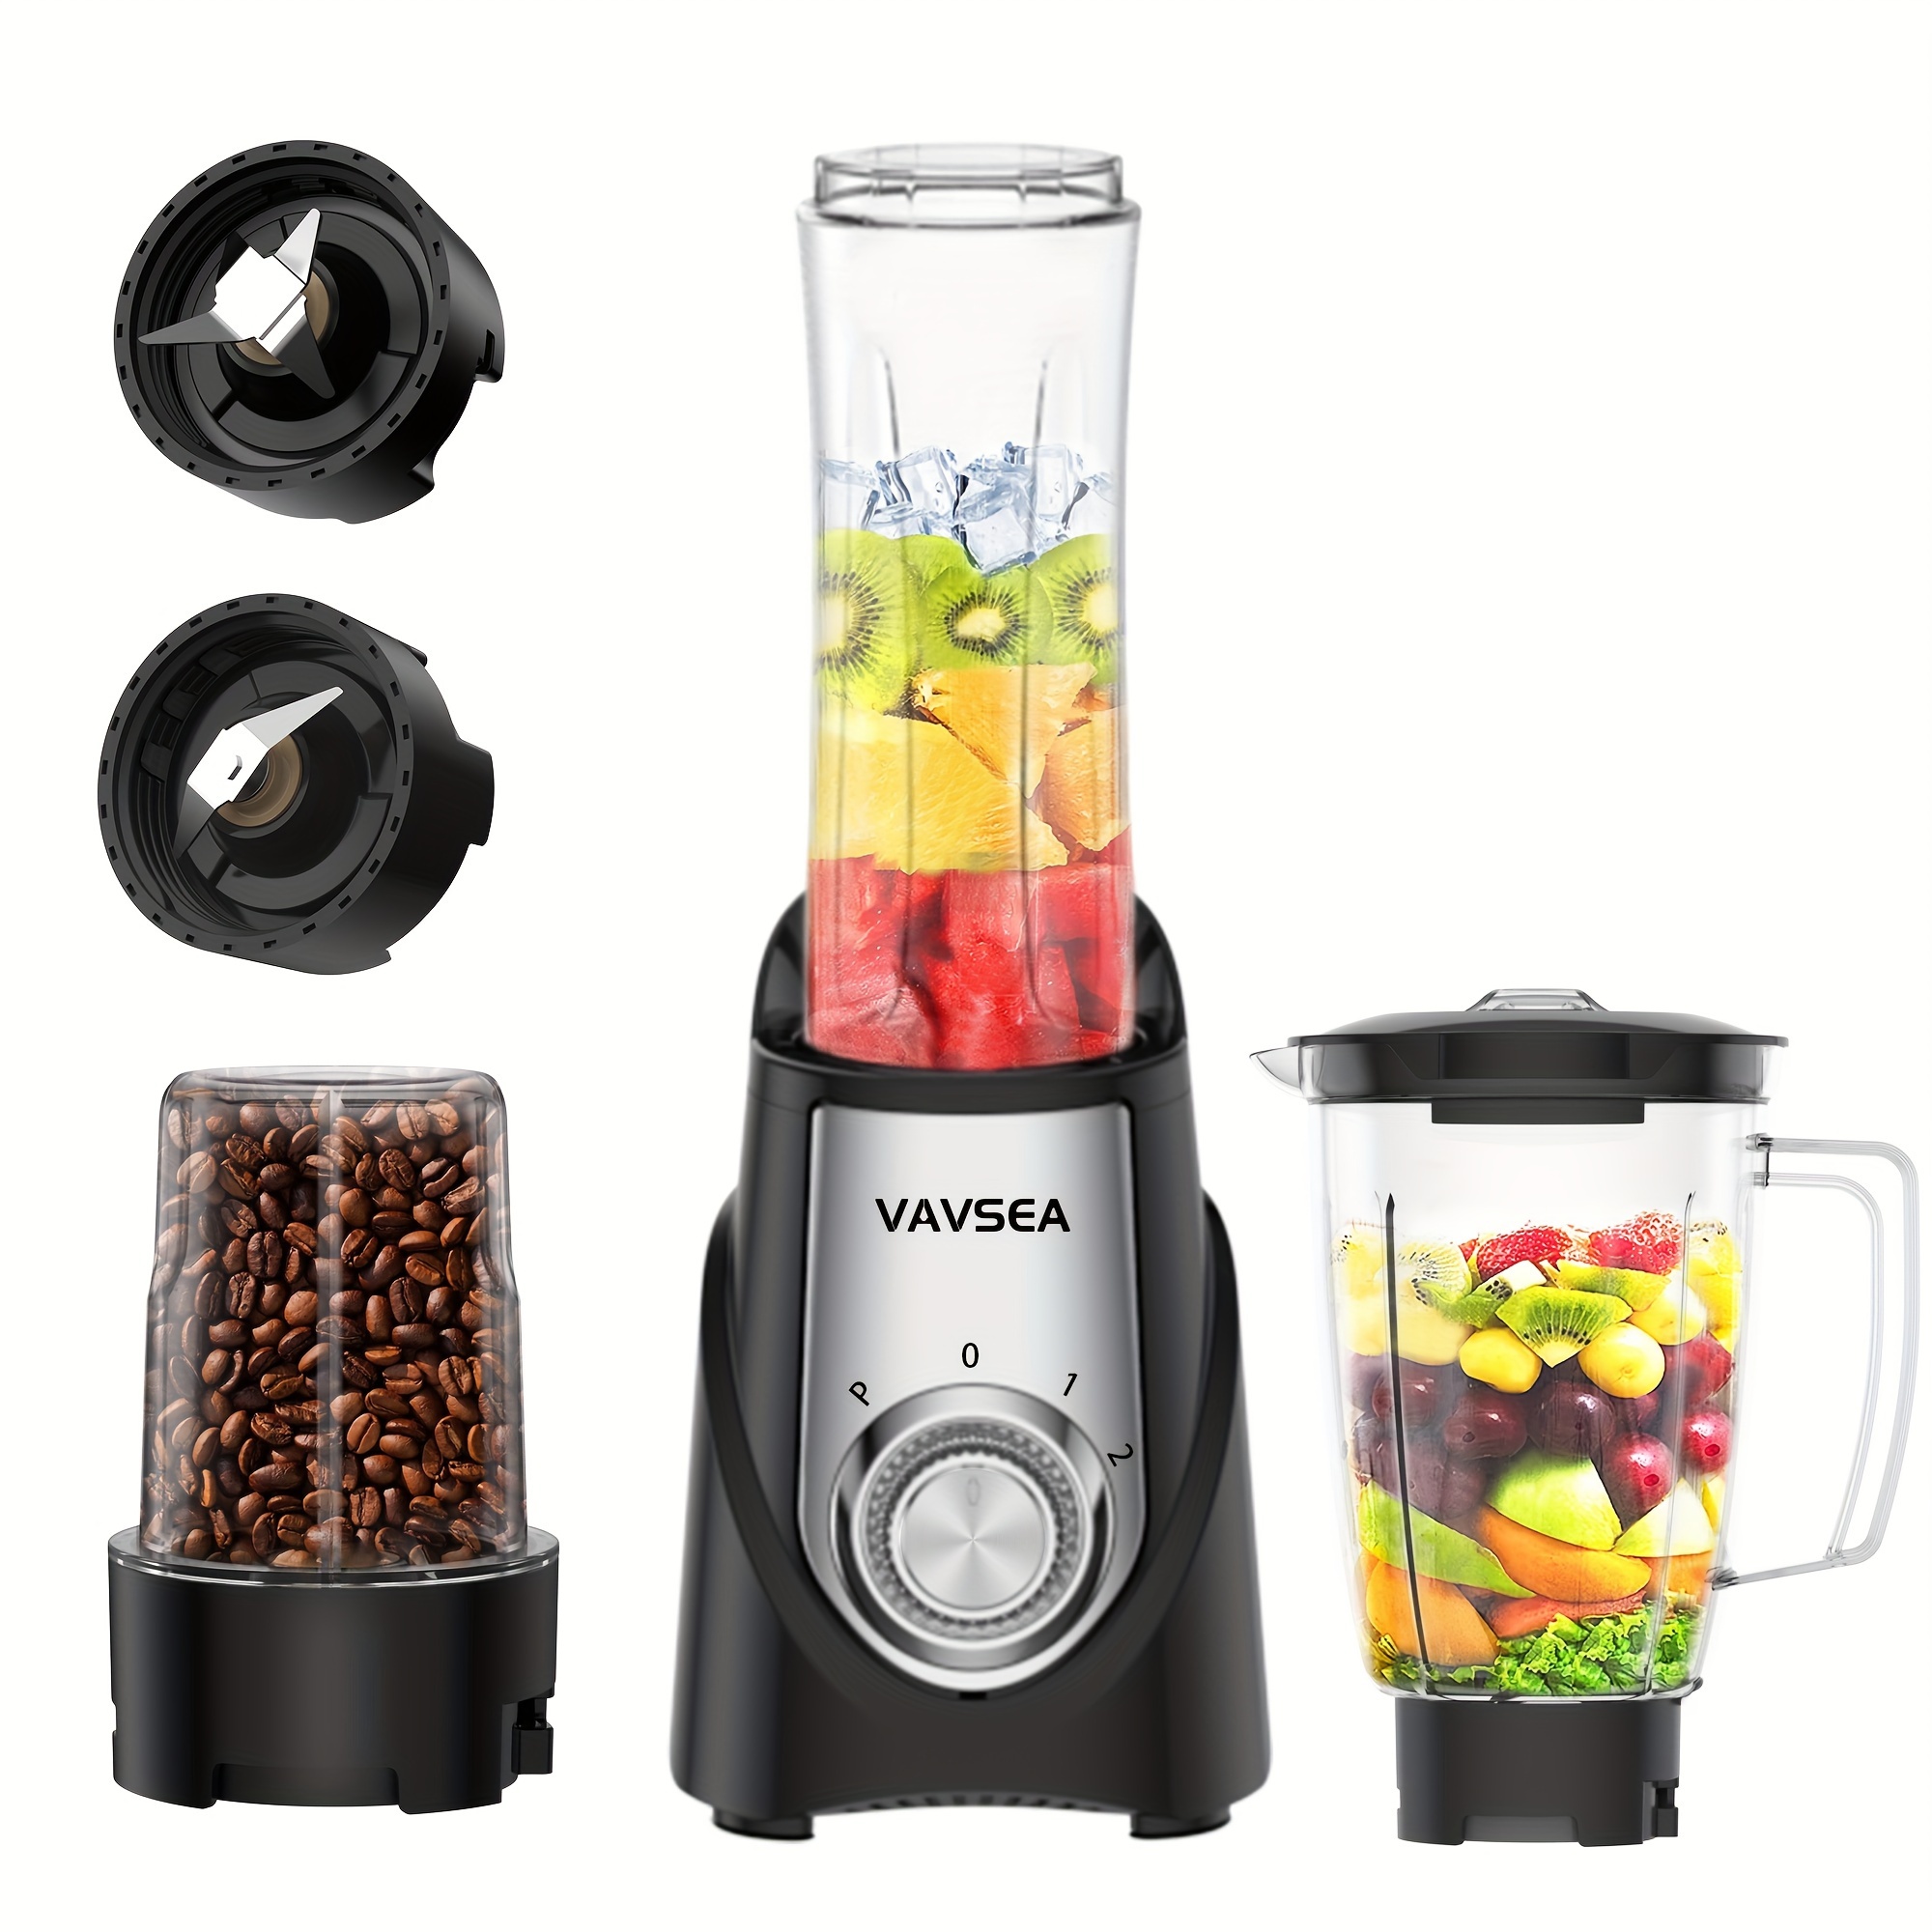 

Vavsea 1000w Smoothie Blender For Shakes And Smoothies, 3 In1 Kitchen Personal Blenders And Grinder Combo For Protein Drinks, Bpa-free, 2 Speeds & Pulse